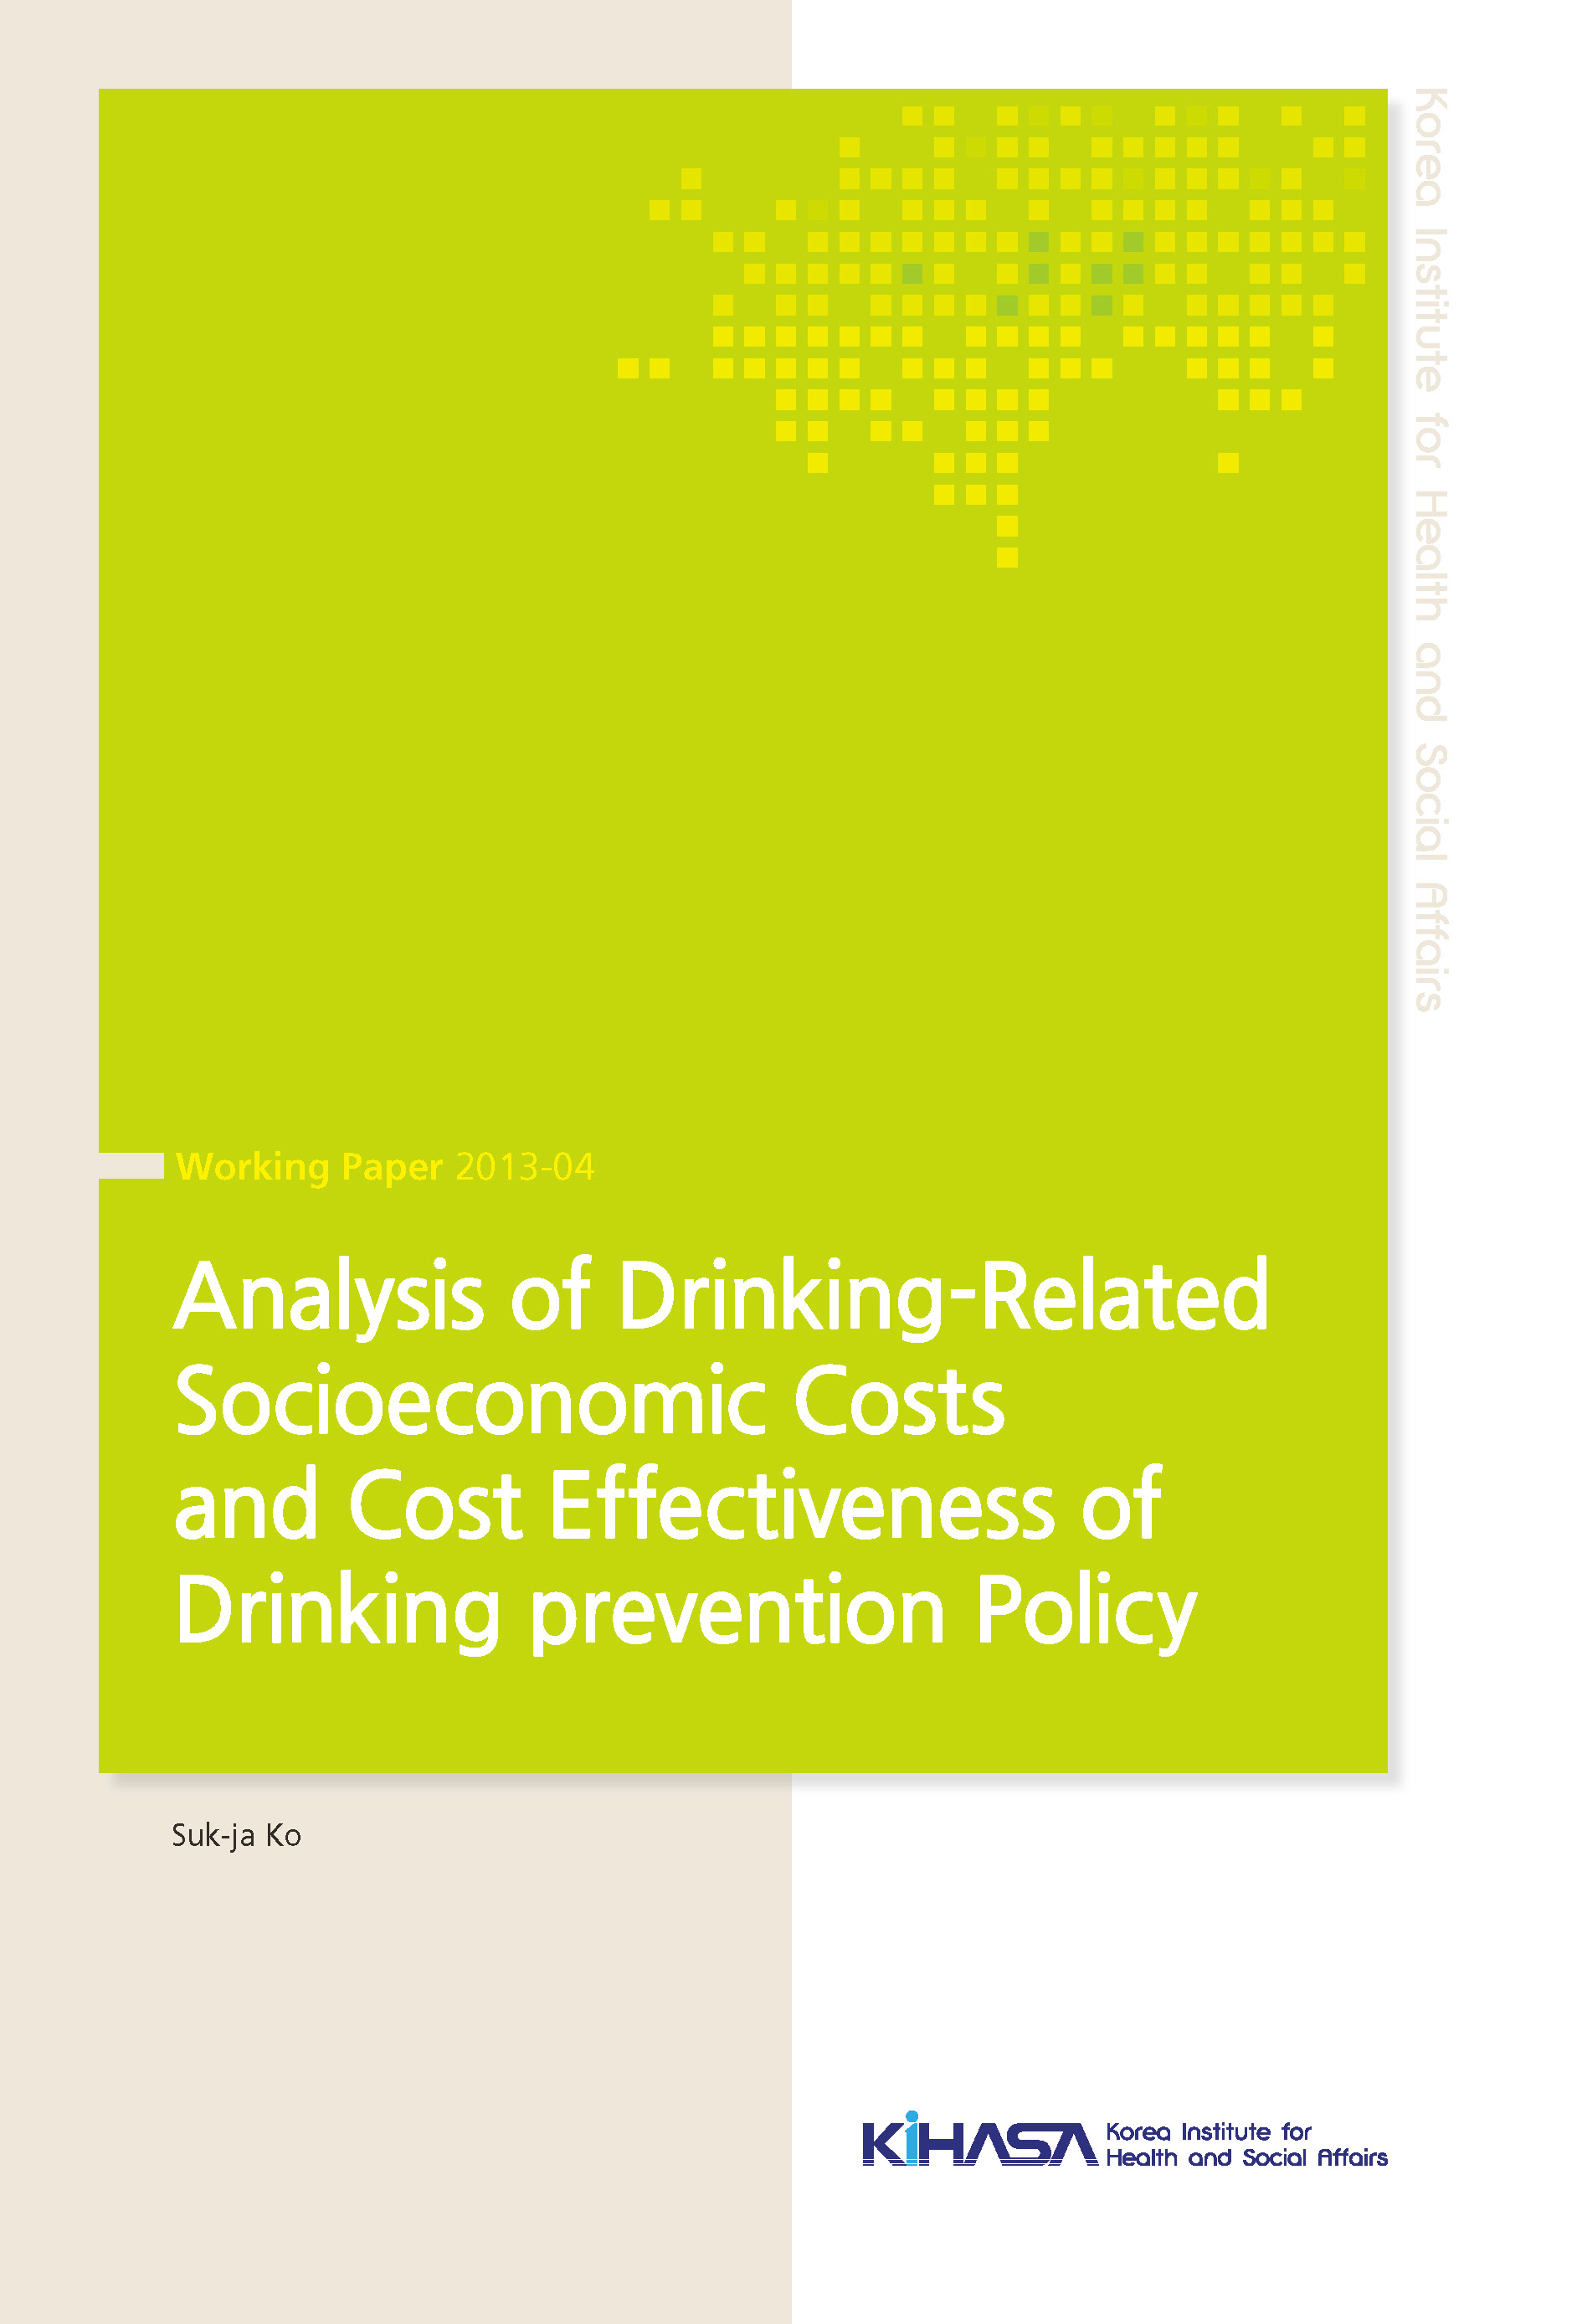 Analysis of Drinking-Related Socioeconomic Costs and Cost Effectiveness of Drinking prevention Policy